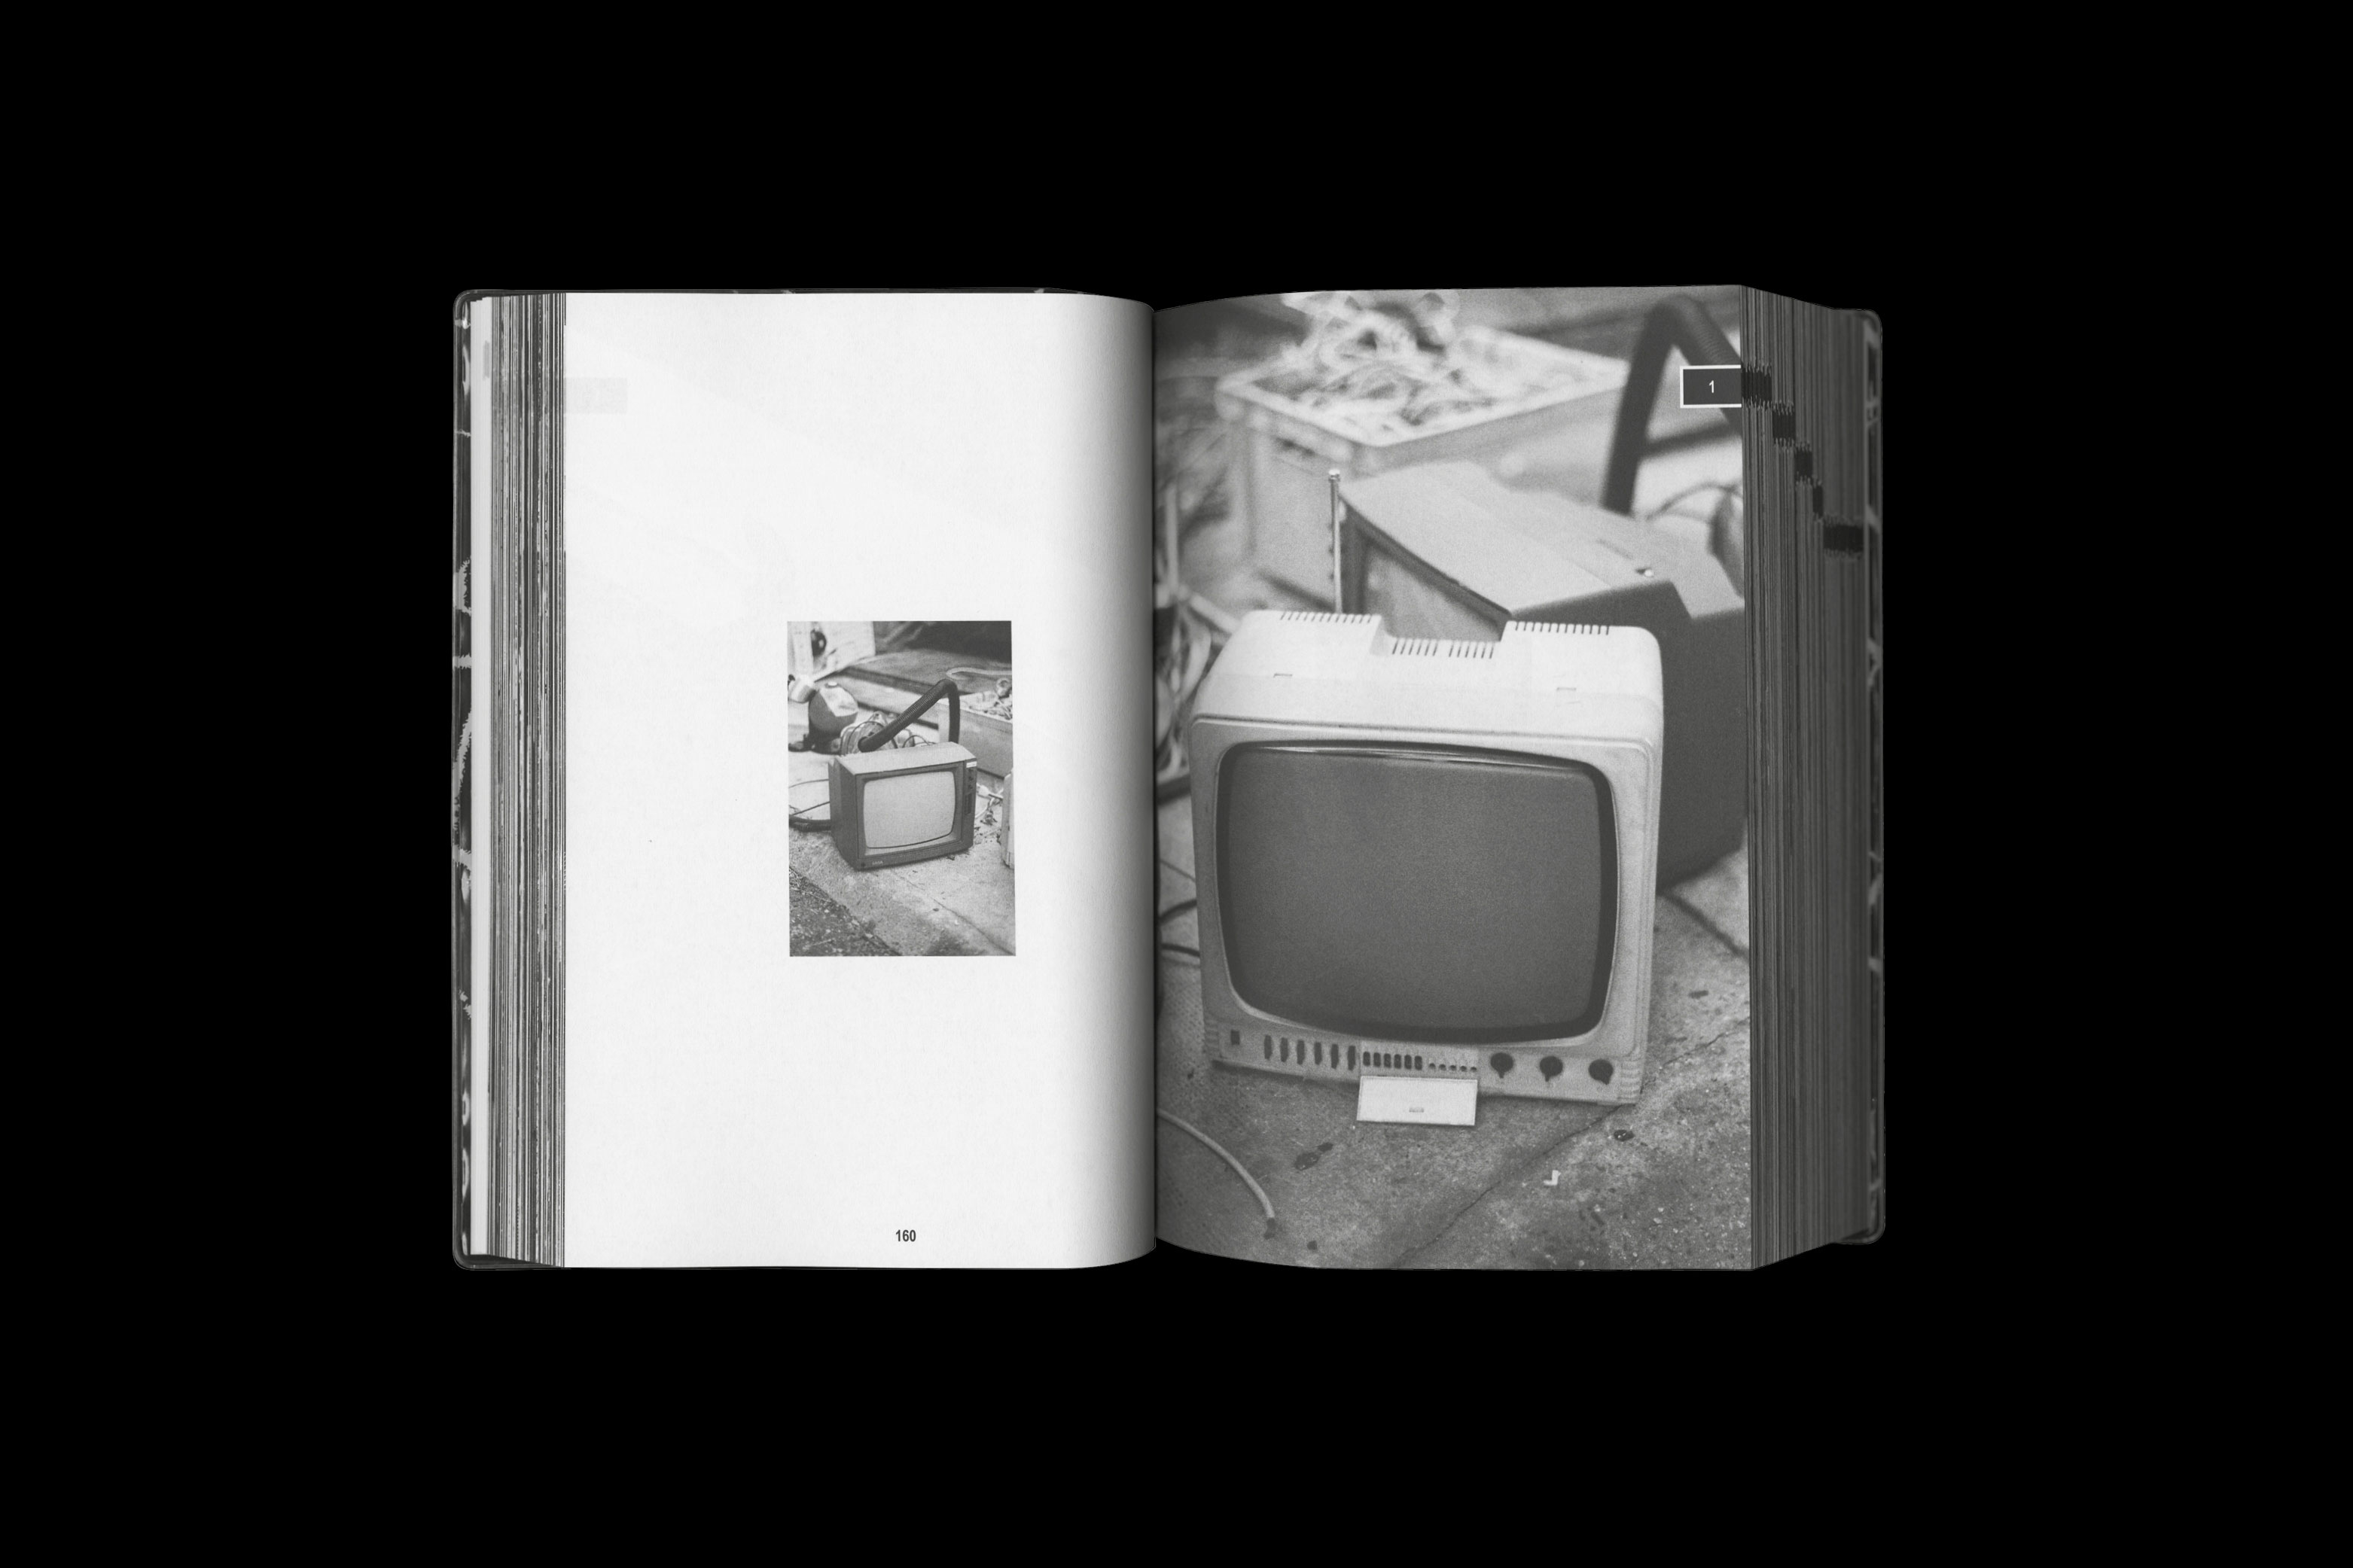 Hécatombe TV, edited by Mitsu Edition in 2022. 350 copies